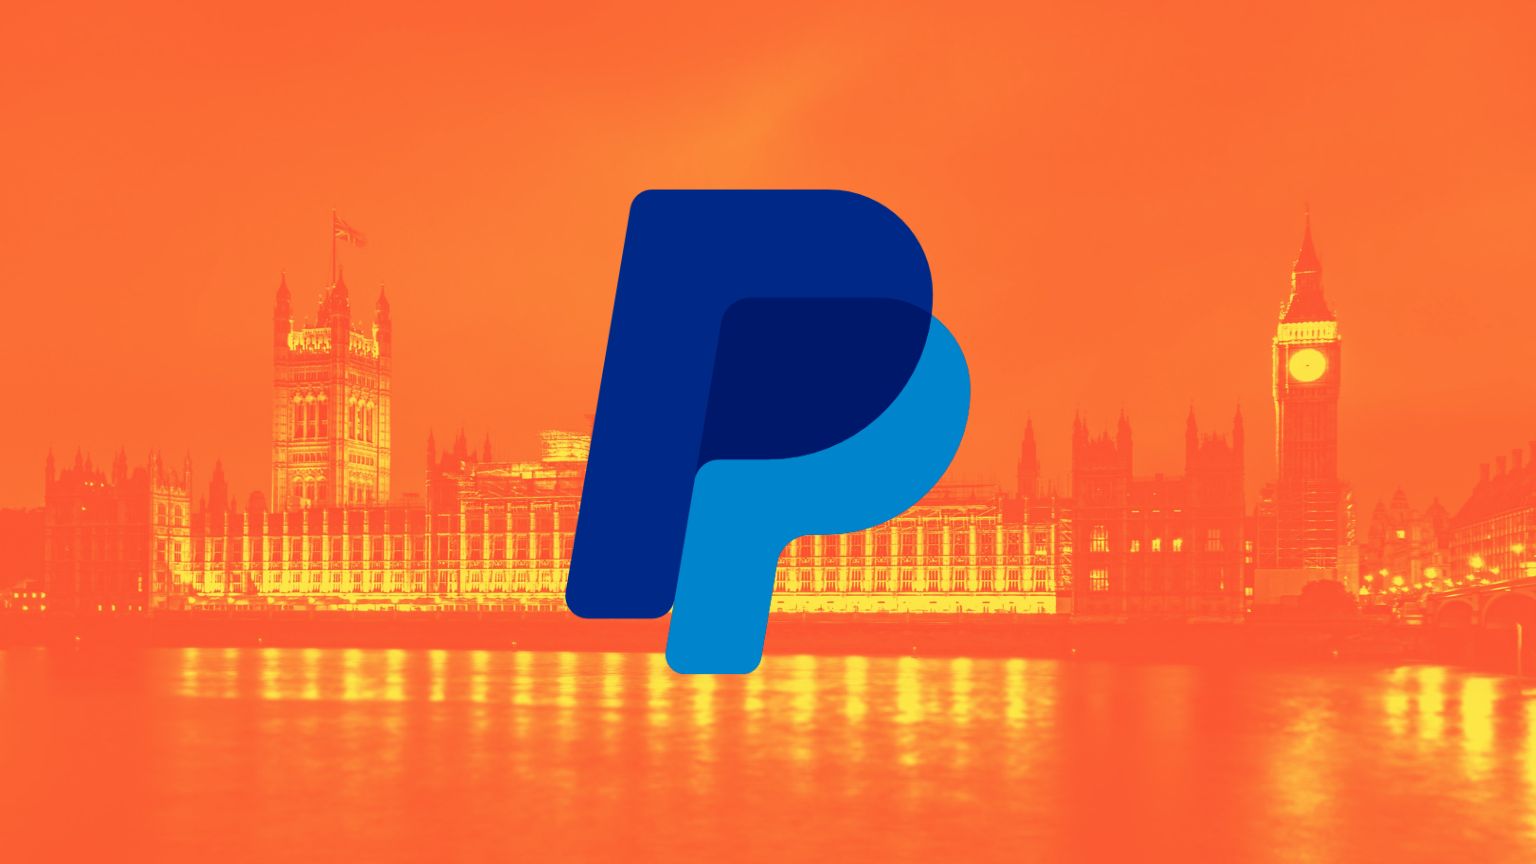 PayPal’s ideological deplatforming spurs proposed UK amendment to stop financial companies policing speech